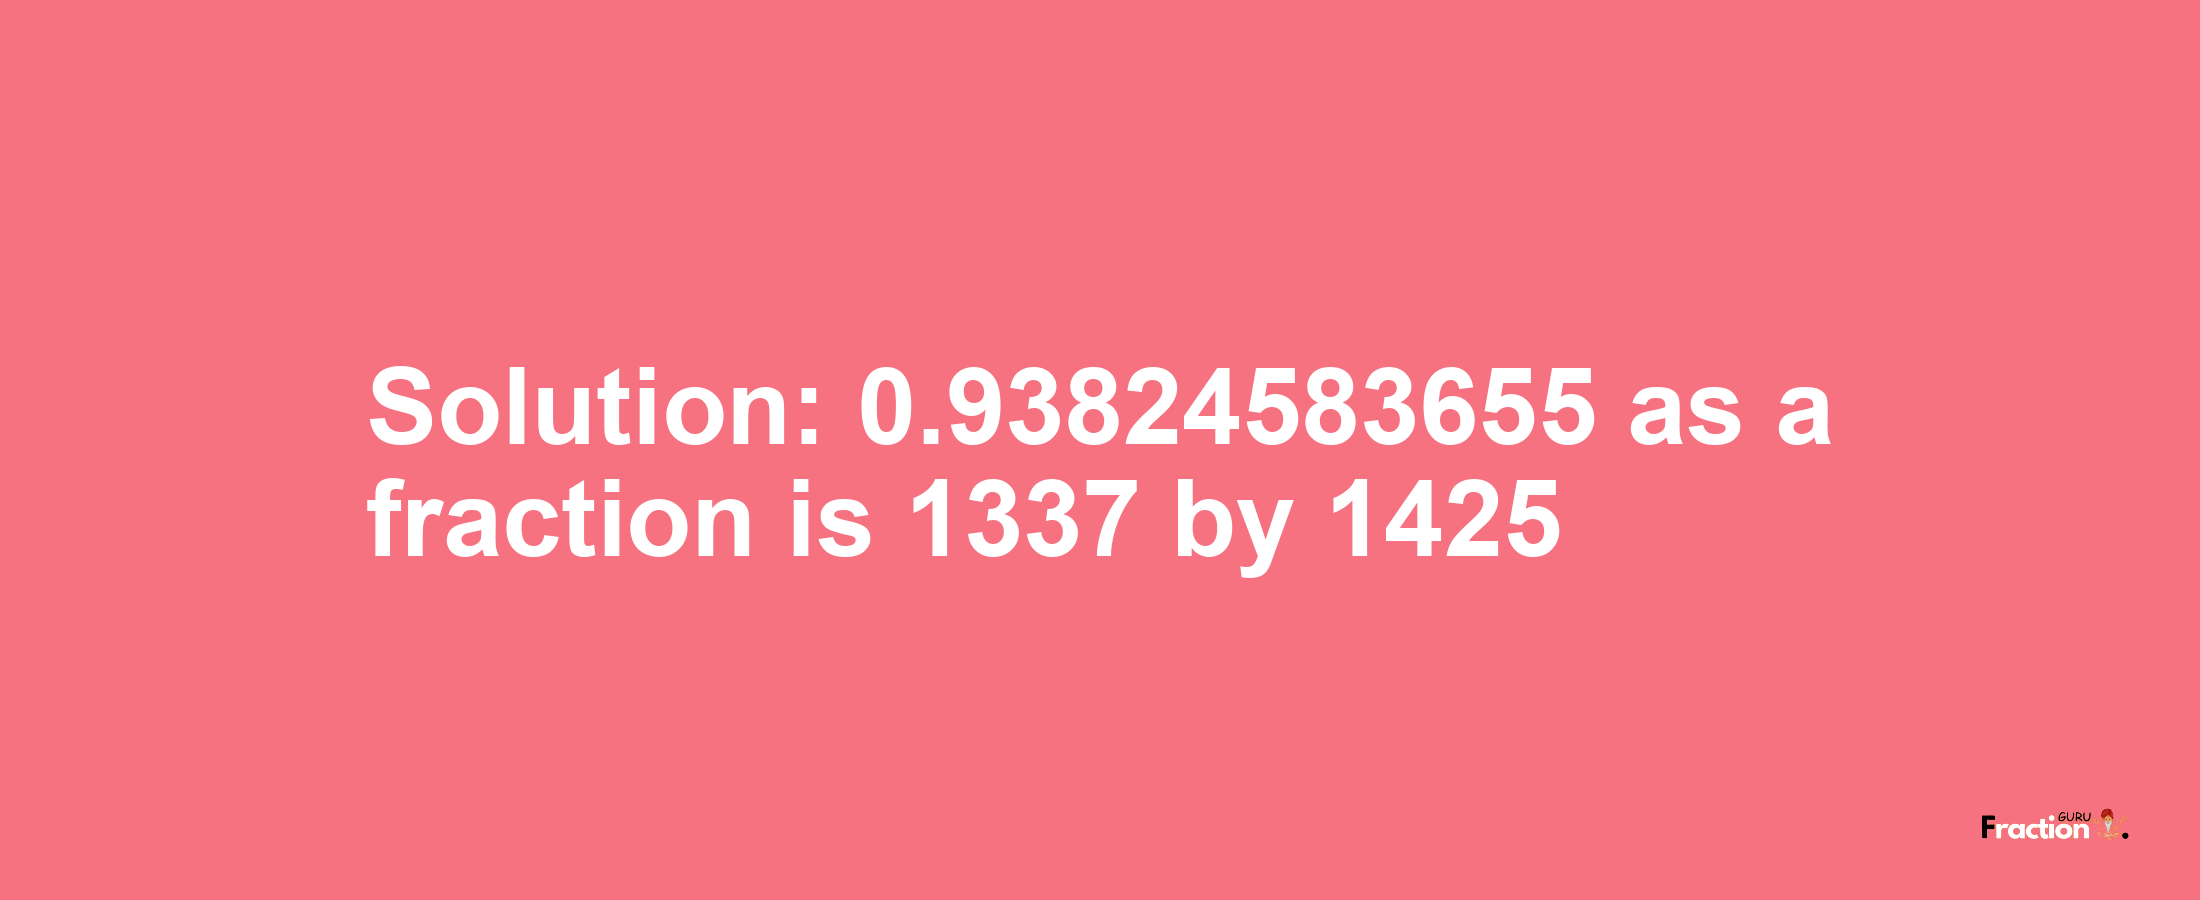 Solution:0.93824583655 as a fraction is 1337/1425